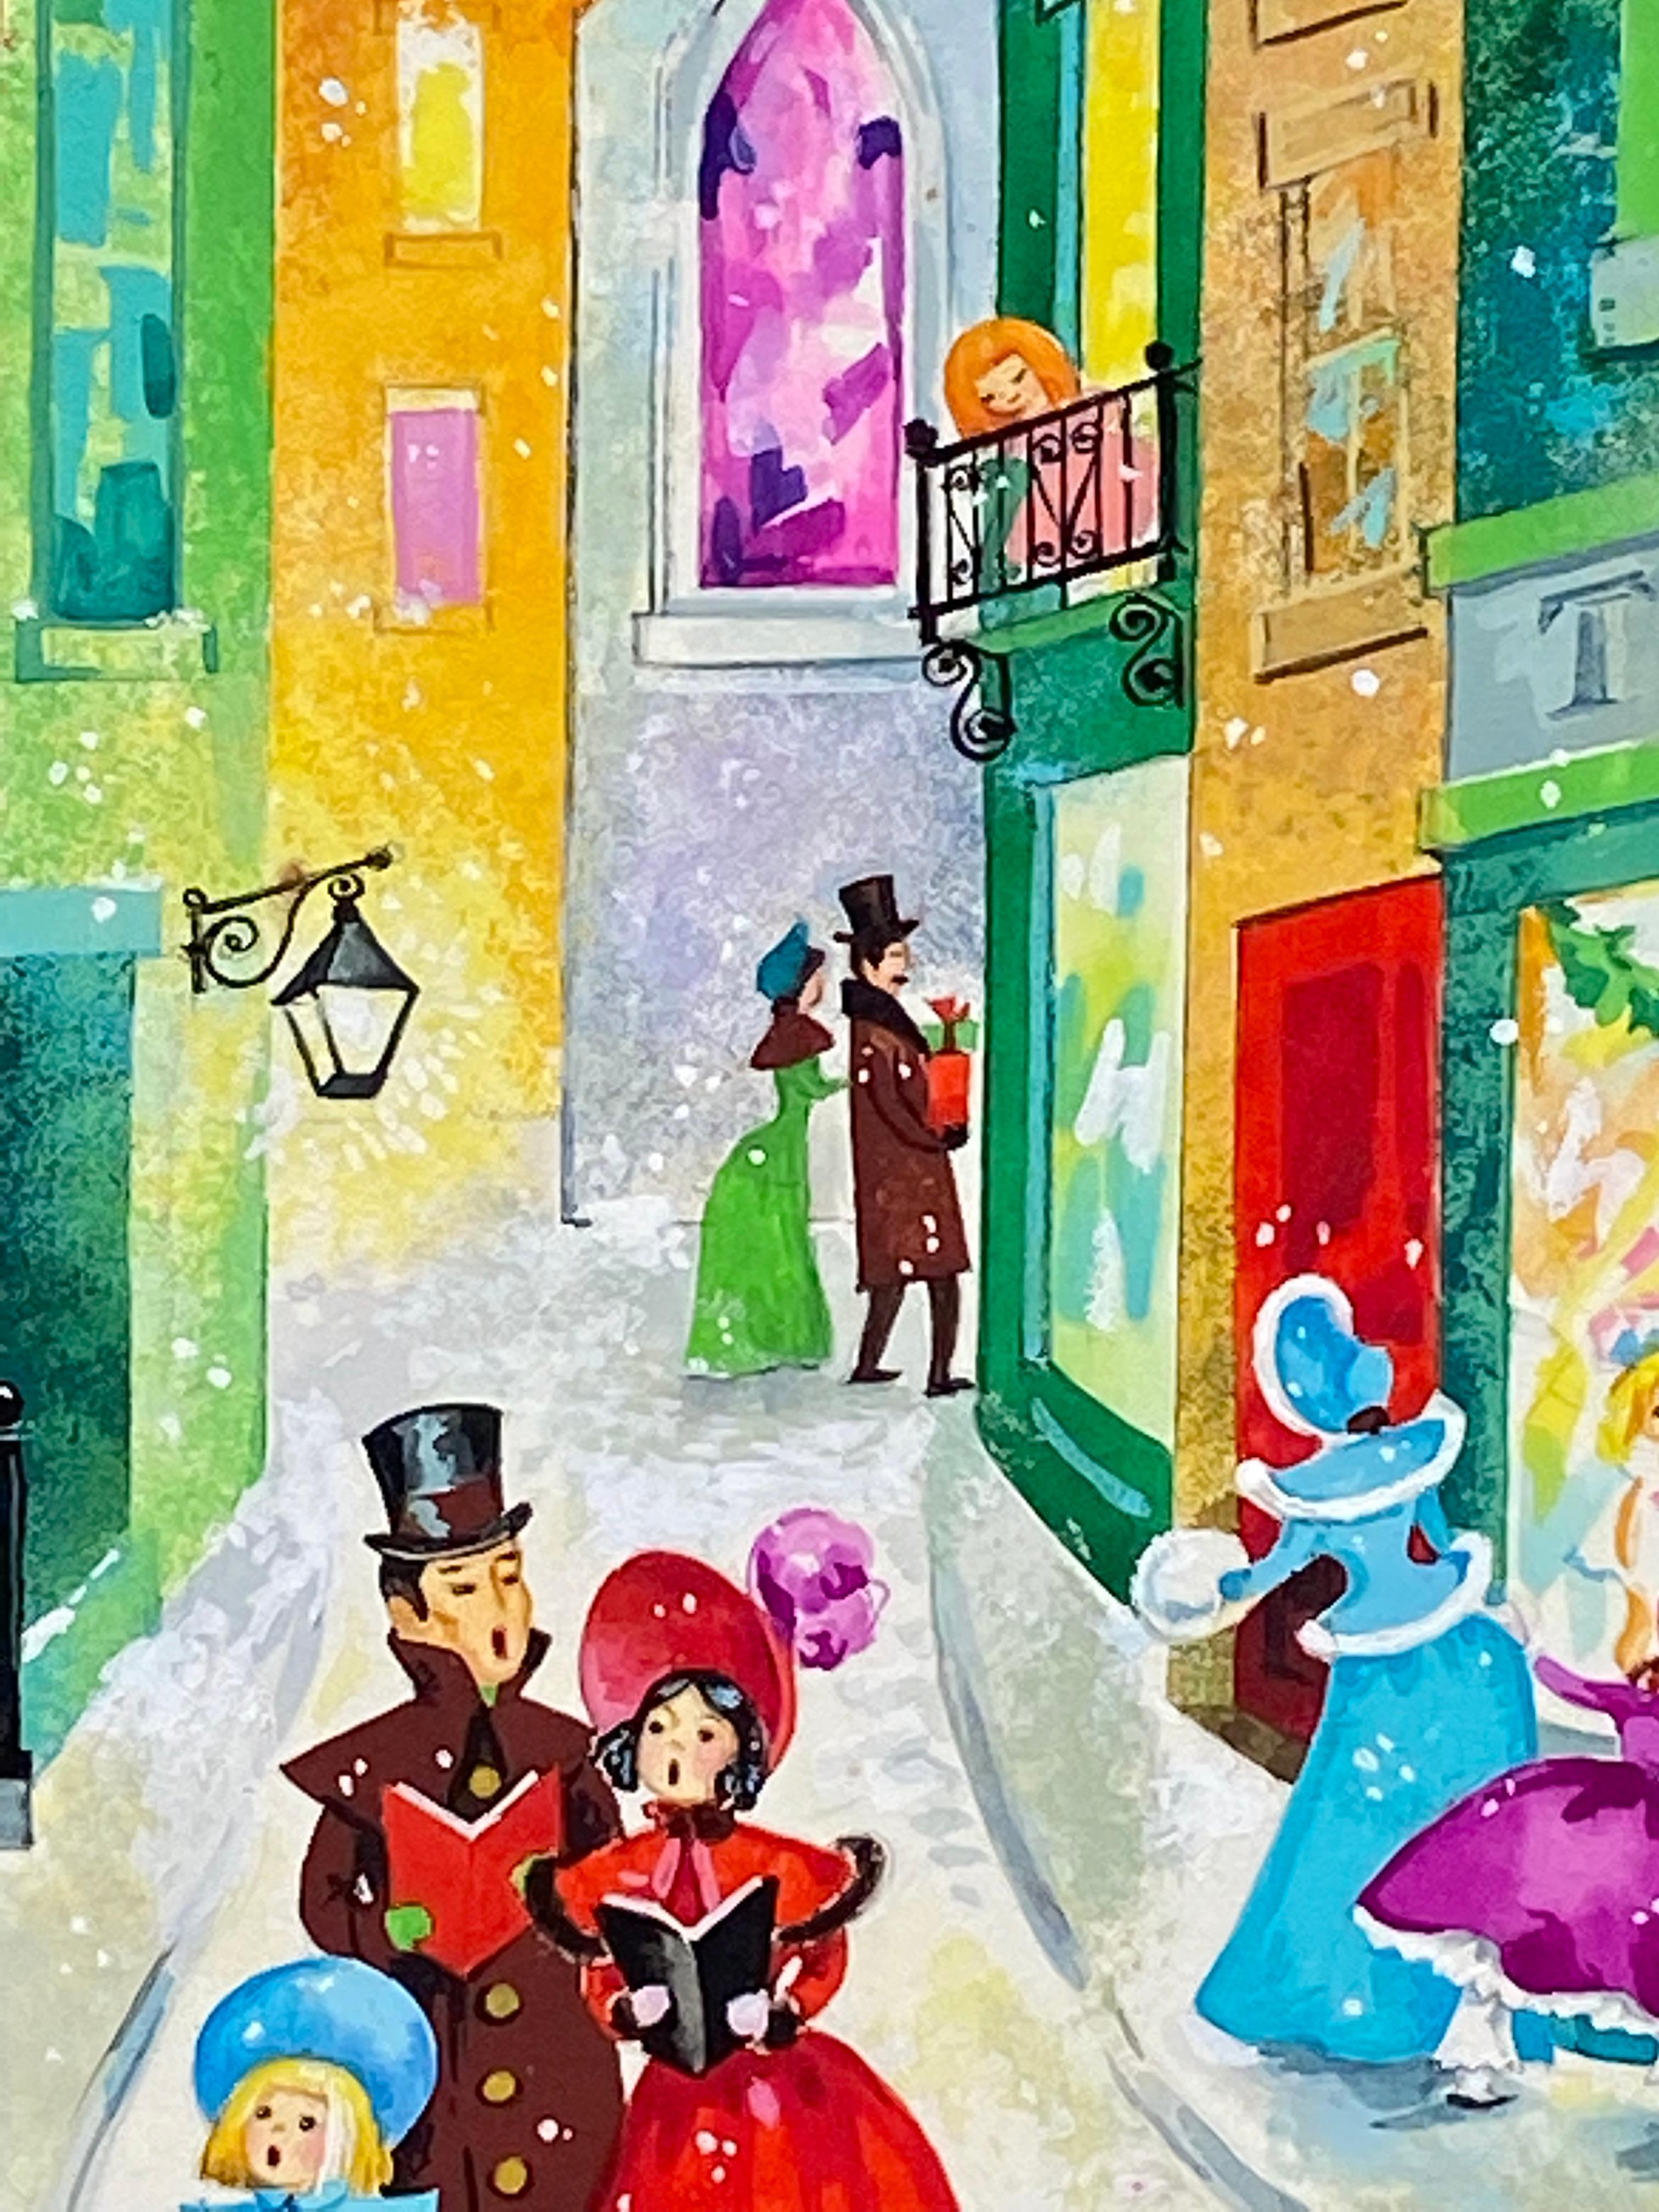 “The Caroler’s” - Other Art Style Art by Unknown